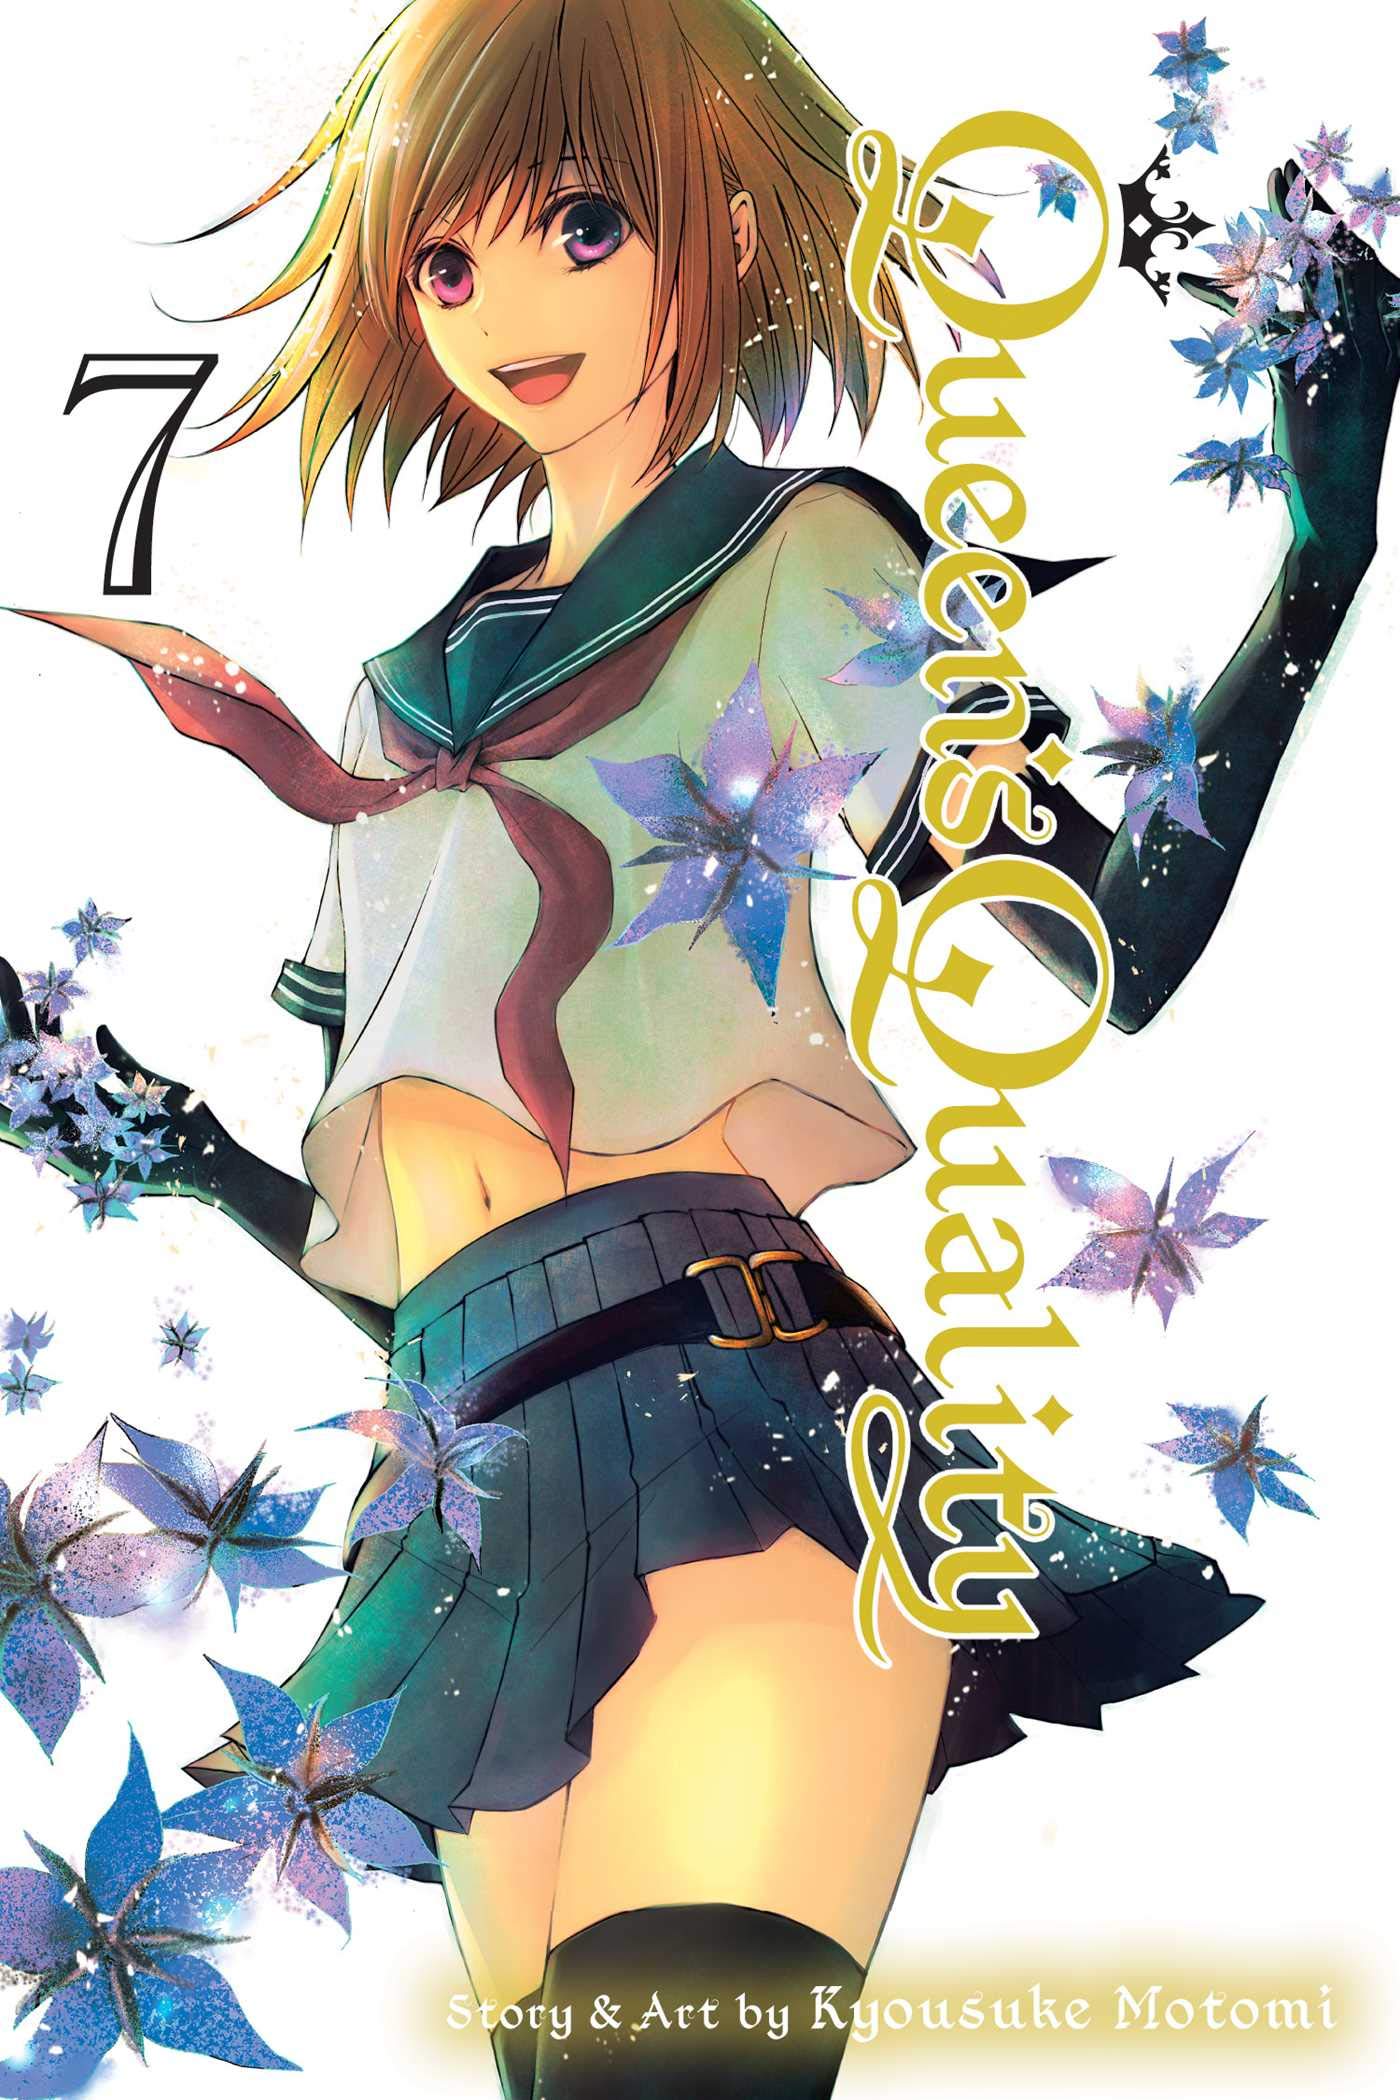 Queen's Quality, Volume 07 cover